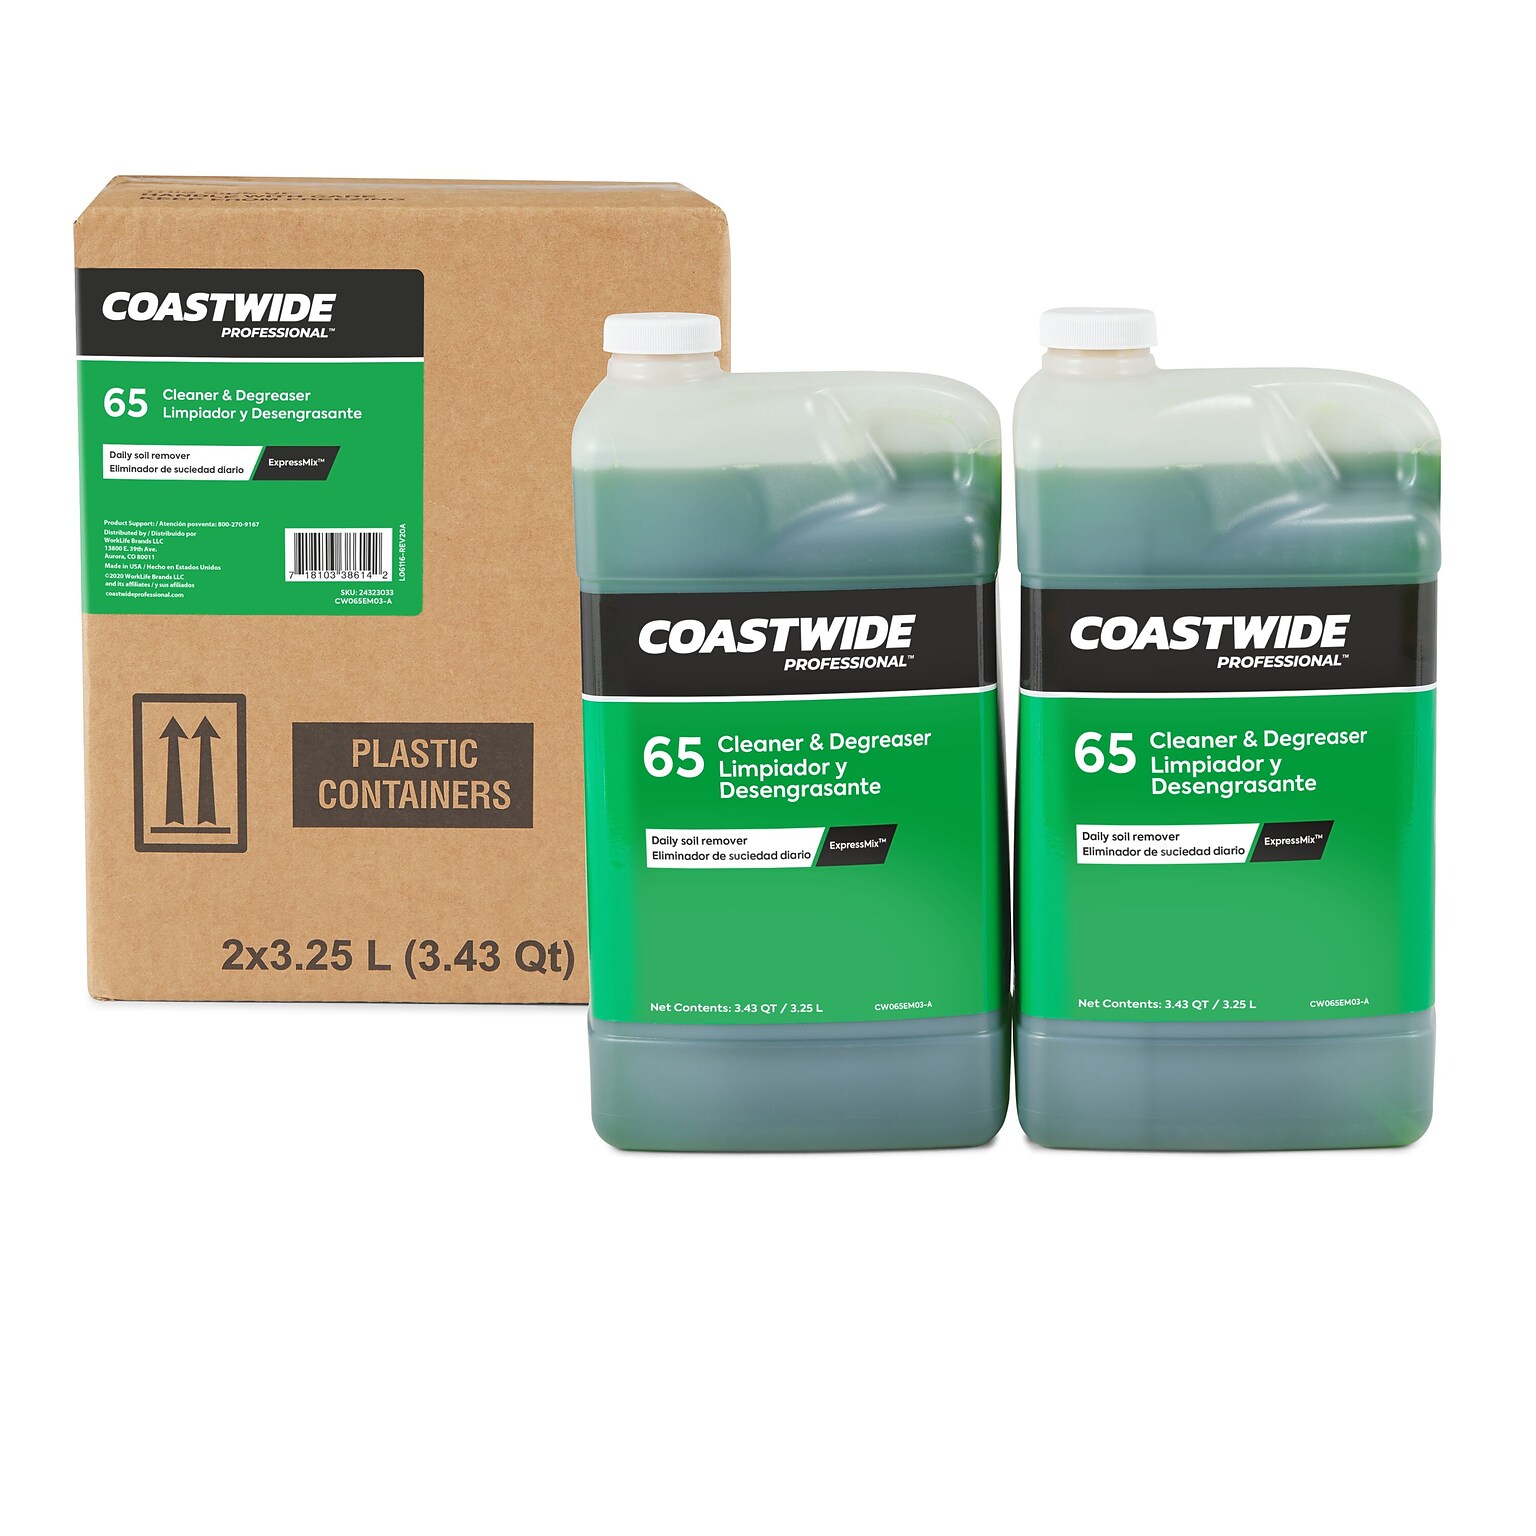 Coastwide Professional Cleaner and Degreaser 65 Heavy-Duty Concentrate for ExpressMix, 3.25L, 2/Carton (CW6503EM-A)